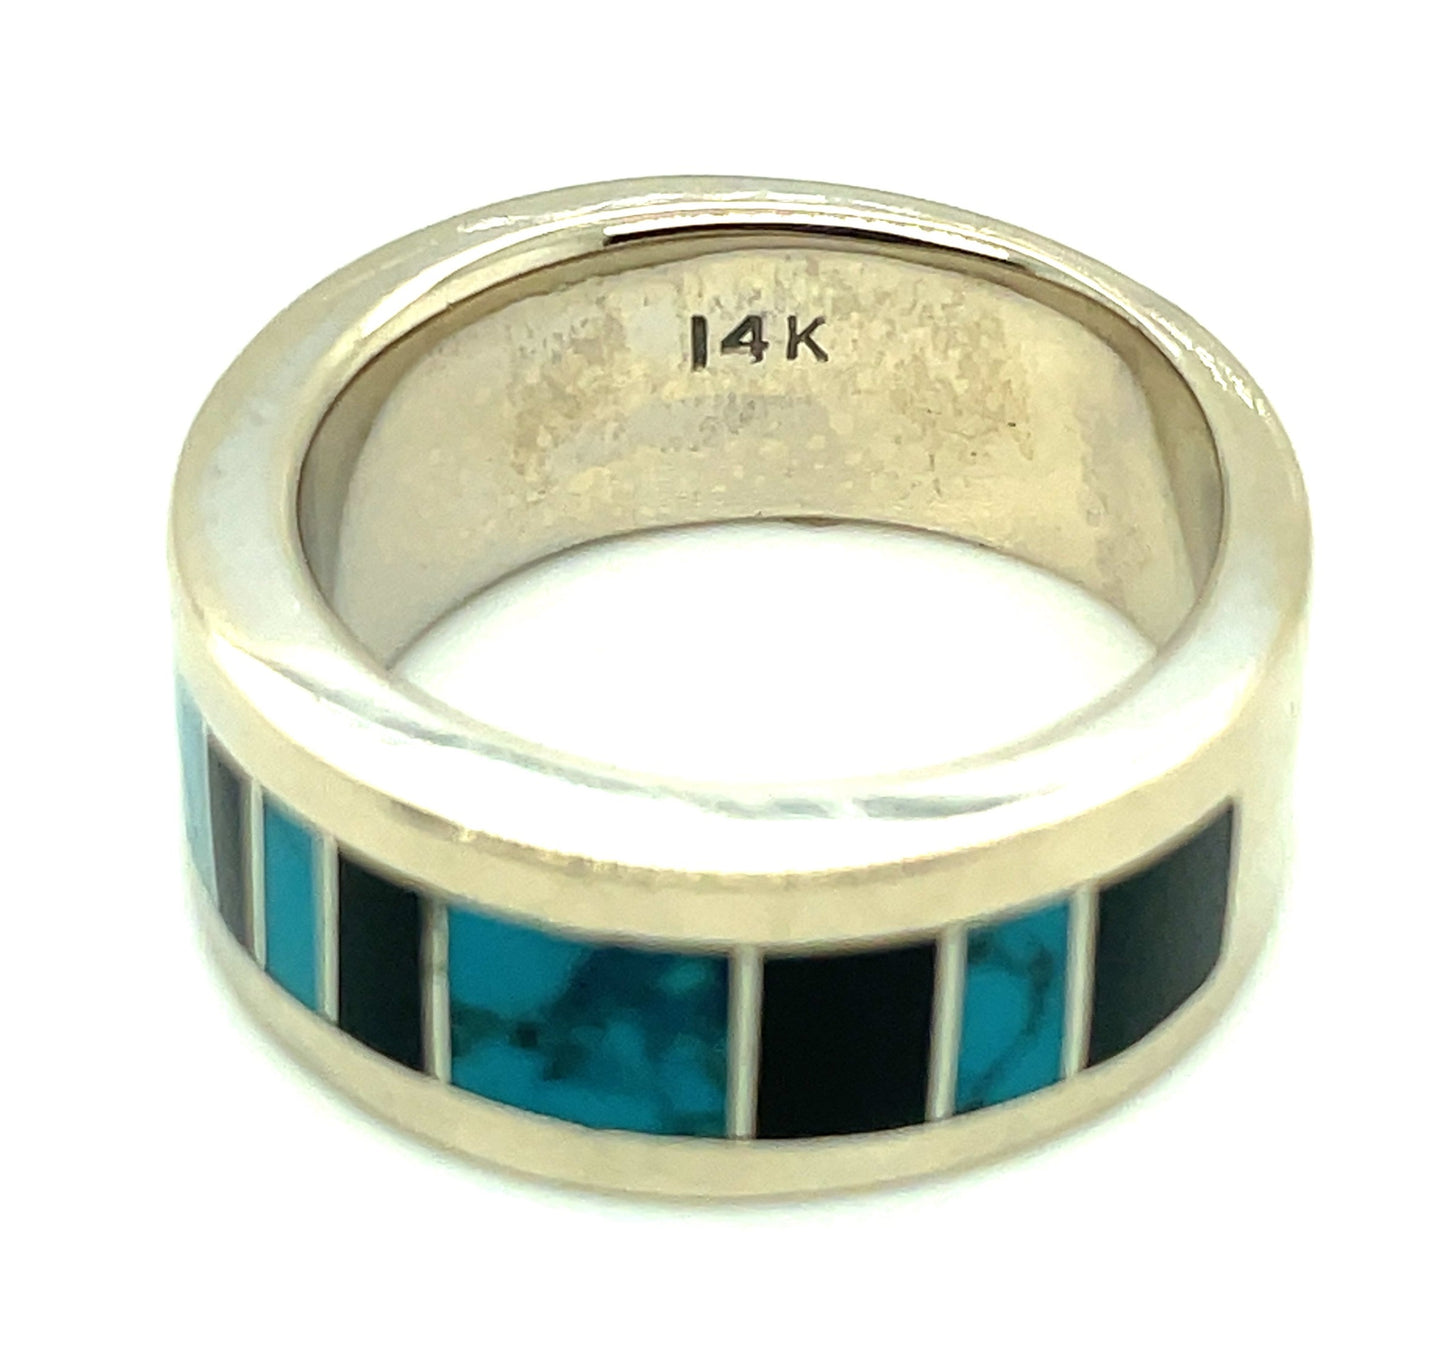 14k White Gold Turquoise and Black Jade Ring Size 5 Patrick Barnes 8.5 grams